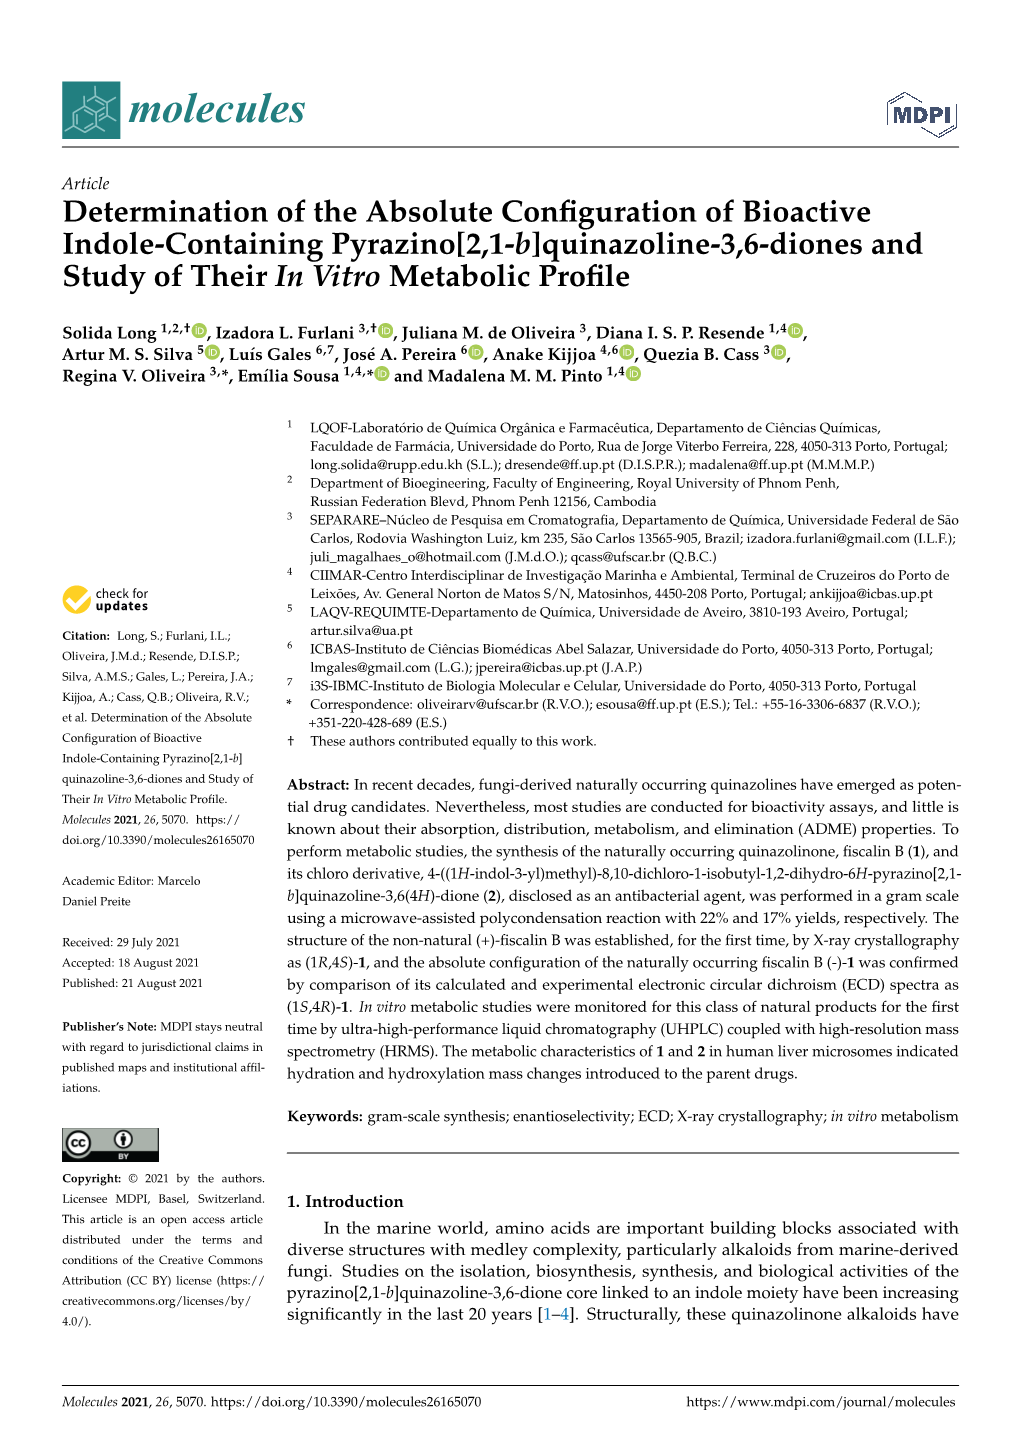 Determination of the Absolute Configuration of Bioactive Indole-Containing Pyrazino[2,1-B]Quinazoline-3,6-Diones and Study of Th